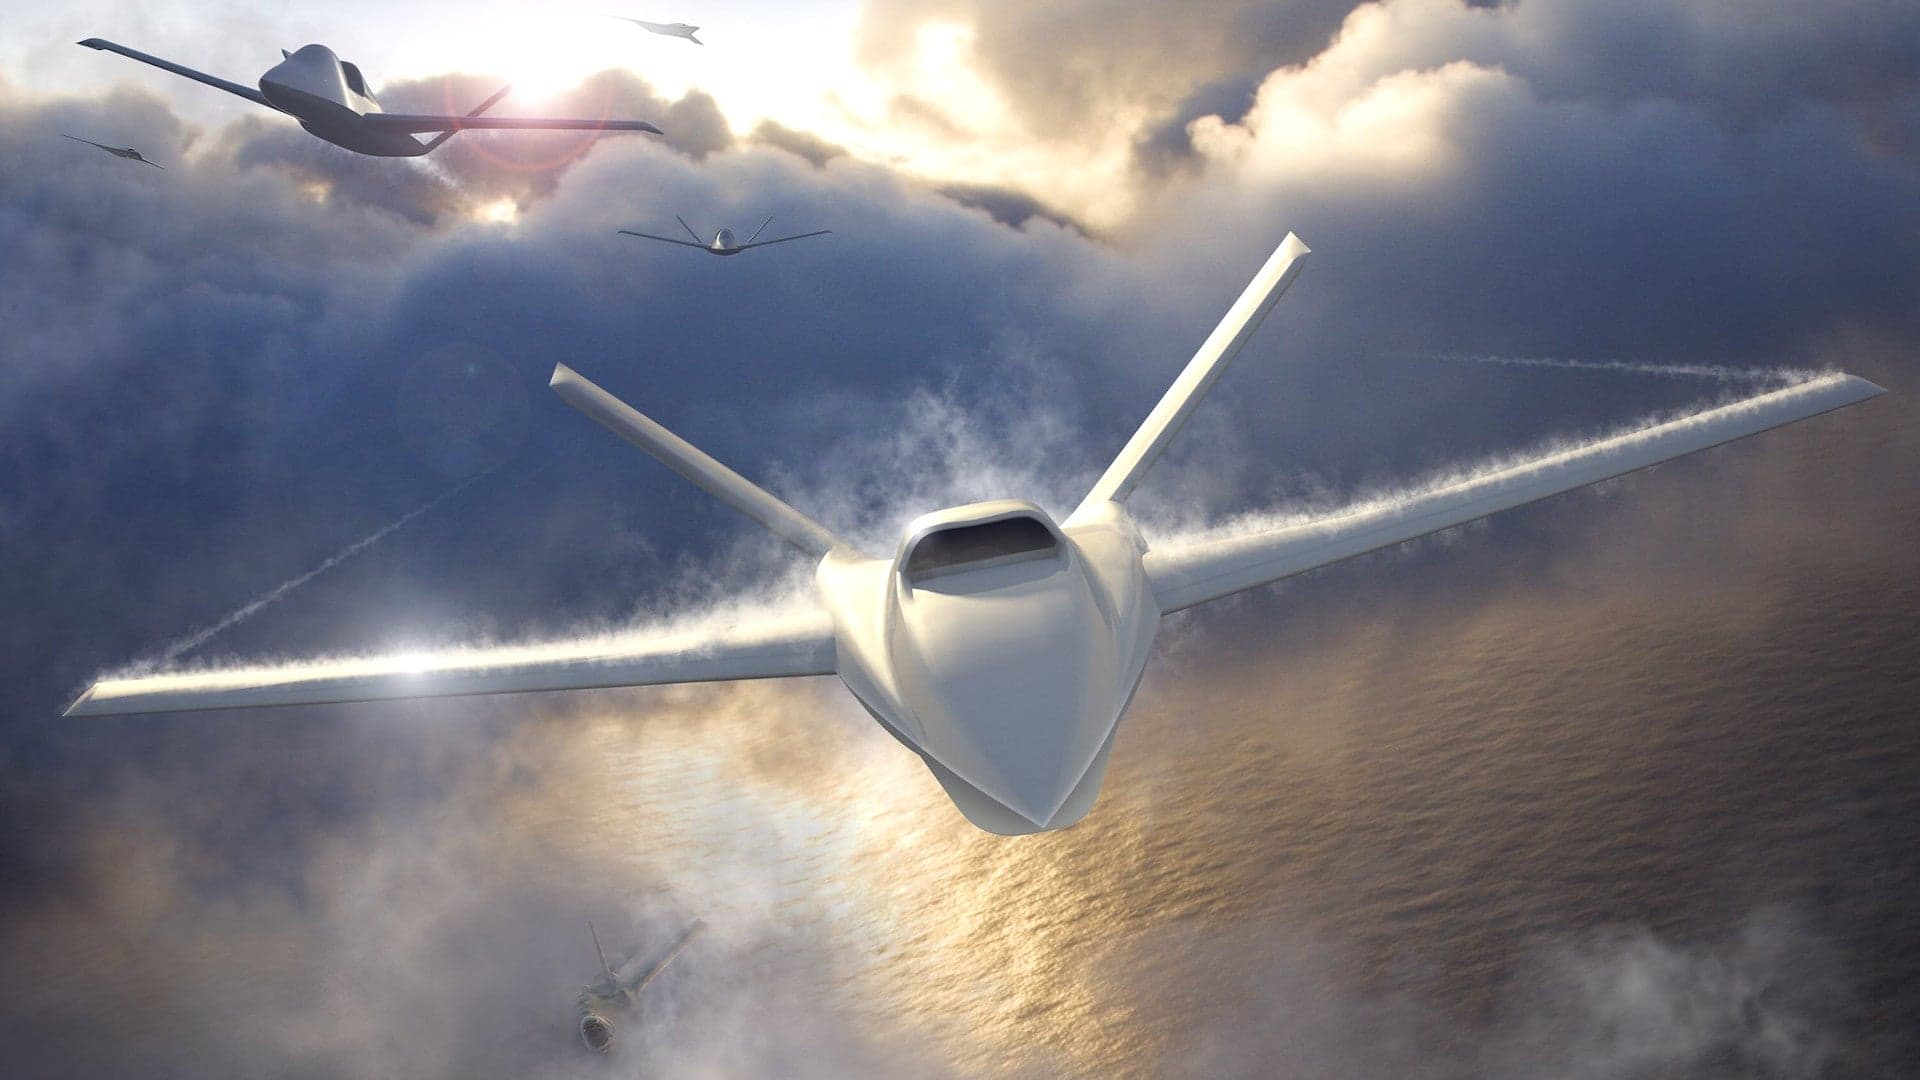 New Unmanned Loyal Wingman Design Based On Stealthy “Son Of Ares” Jet Emerges